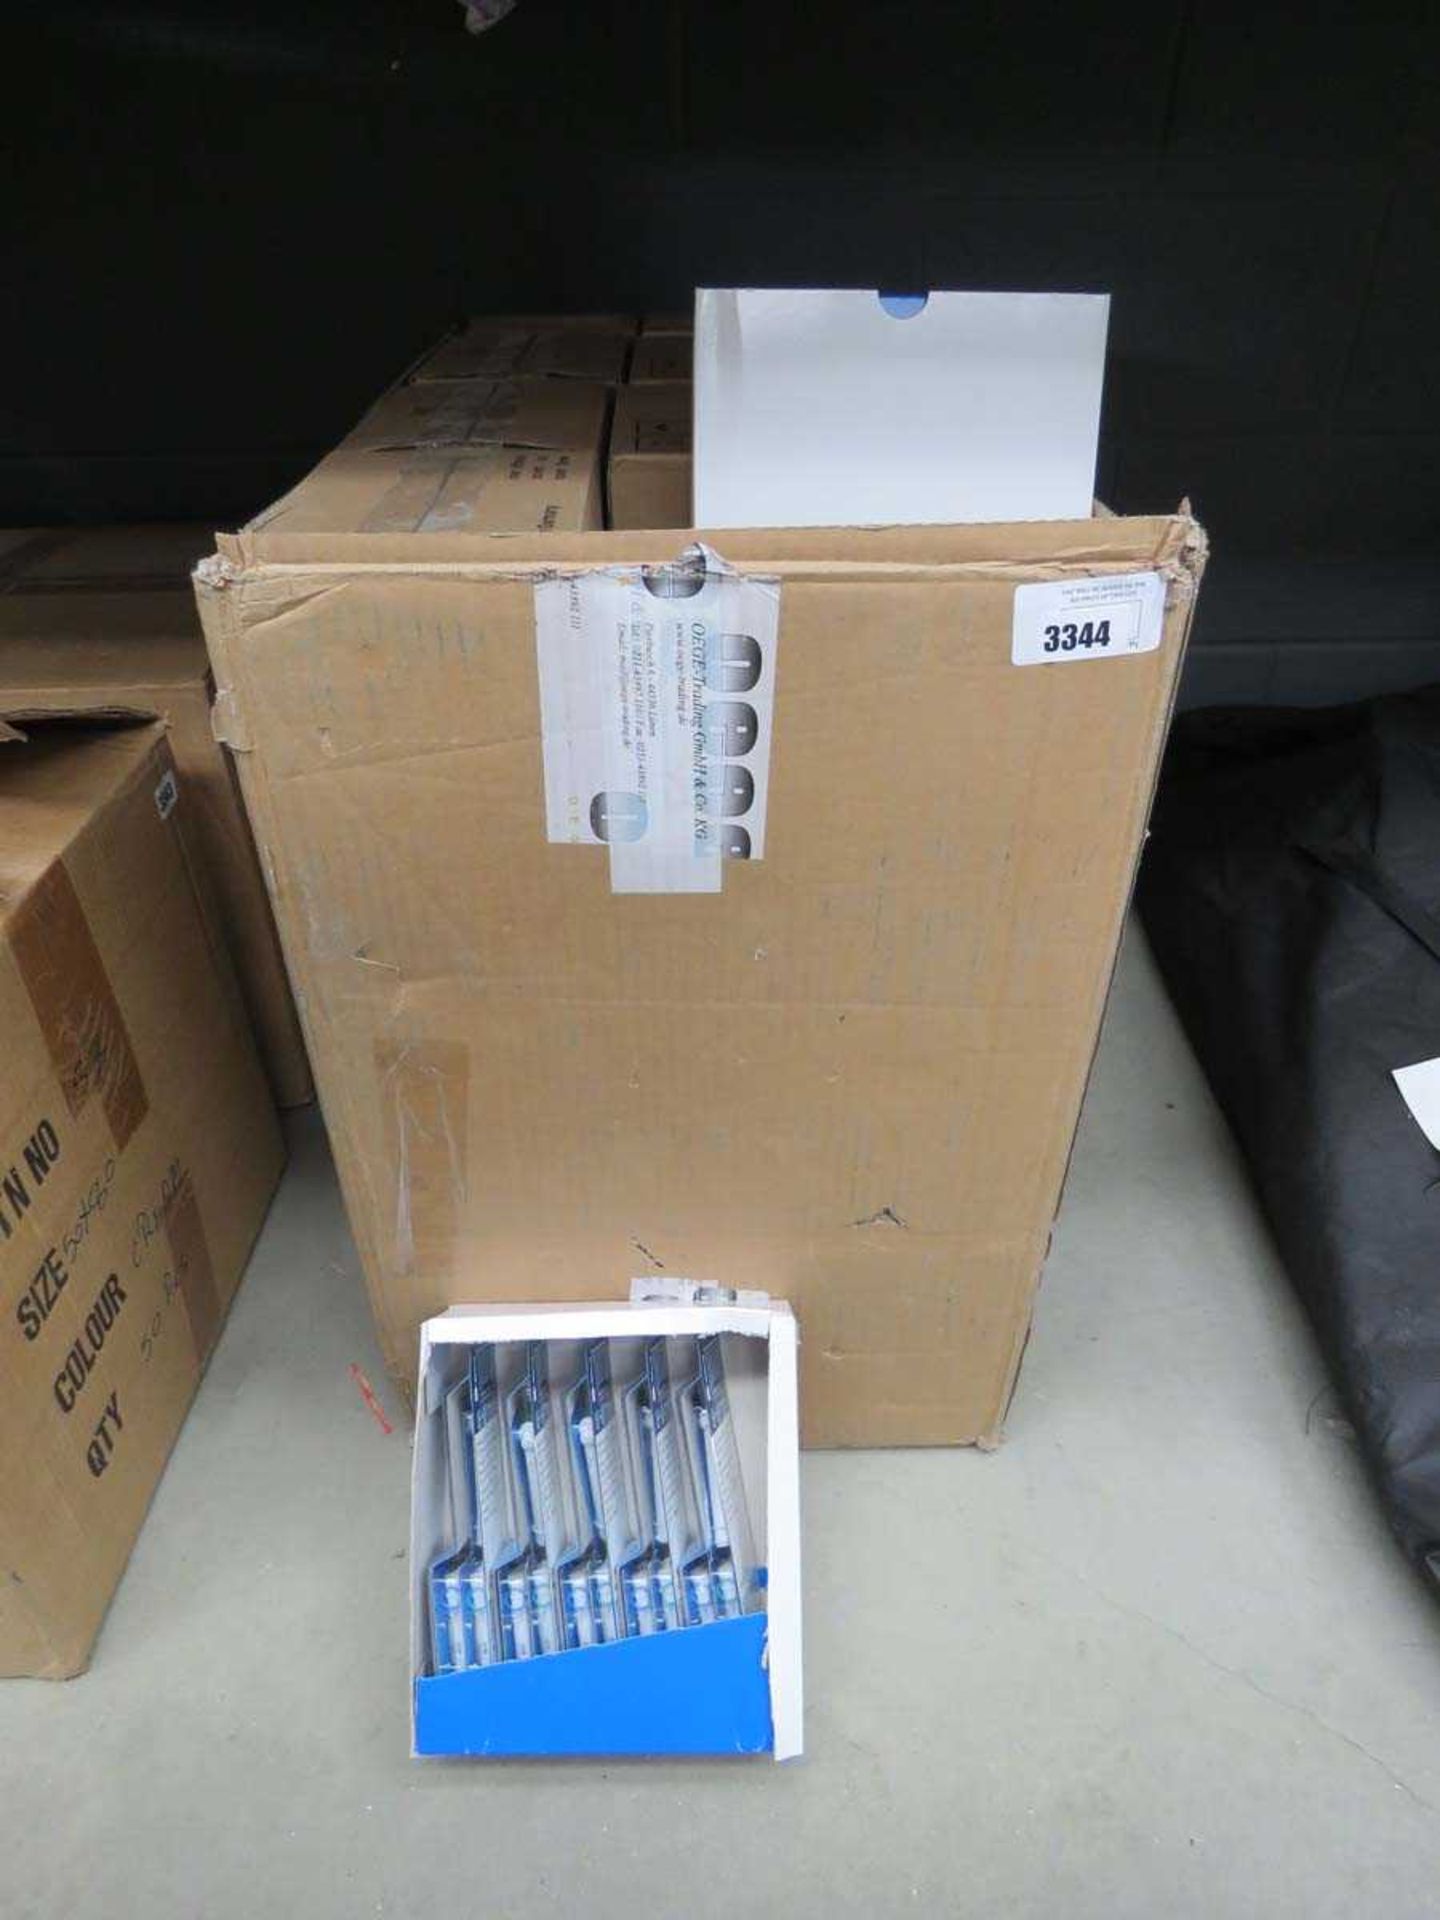 +VAT Box containing Oral-B replacement electric toothbrush heads